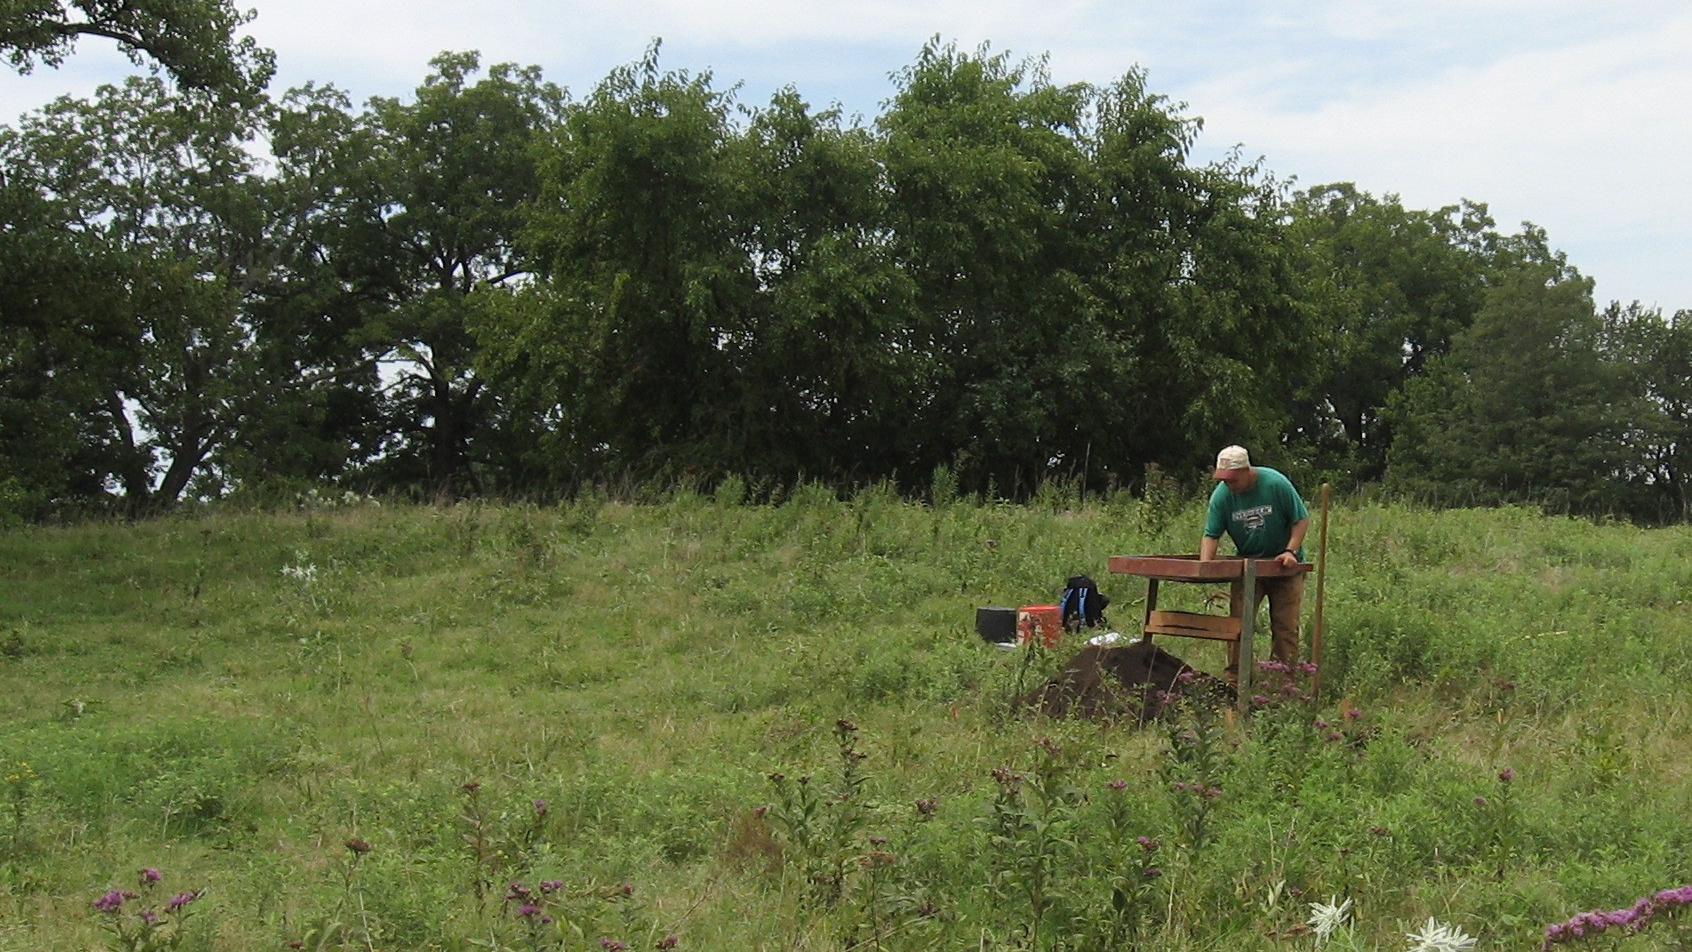 Mike McKay, an archaeologist with the ODOT Cultural Resources Program, conducting archaeological evaluative testing at a site in Coal County, Oklahoma.